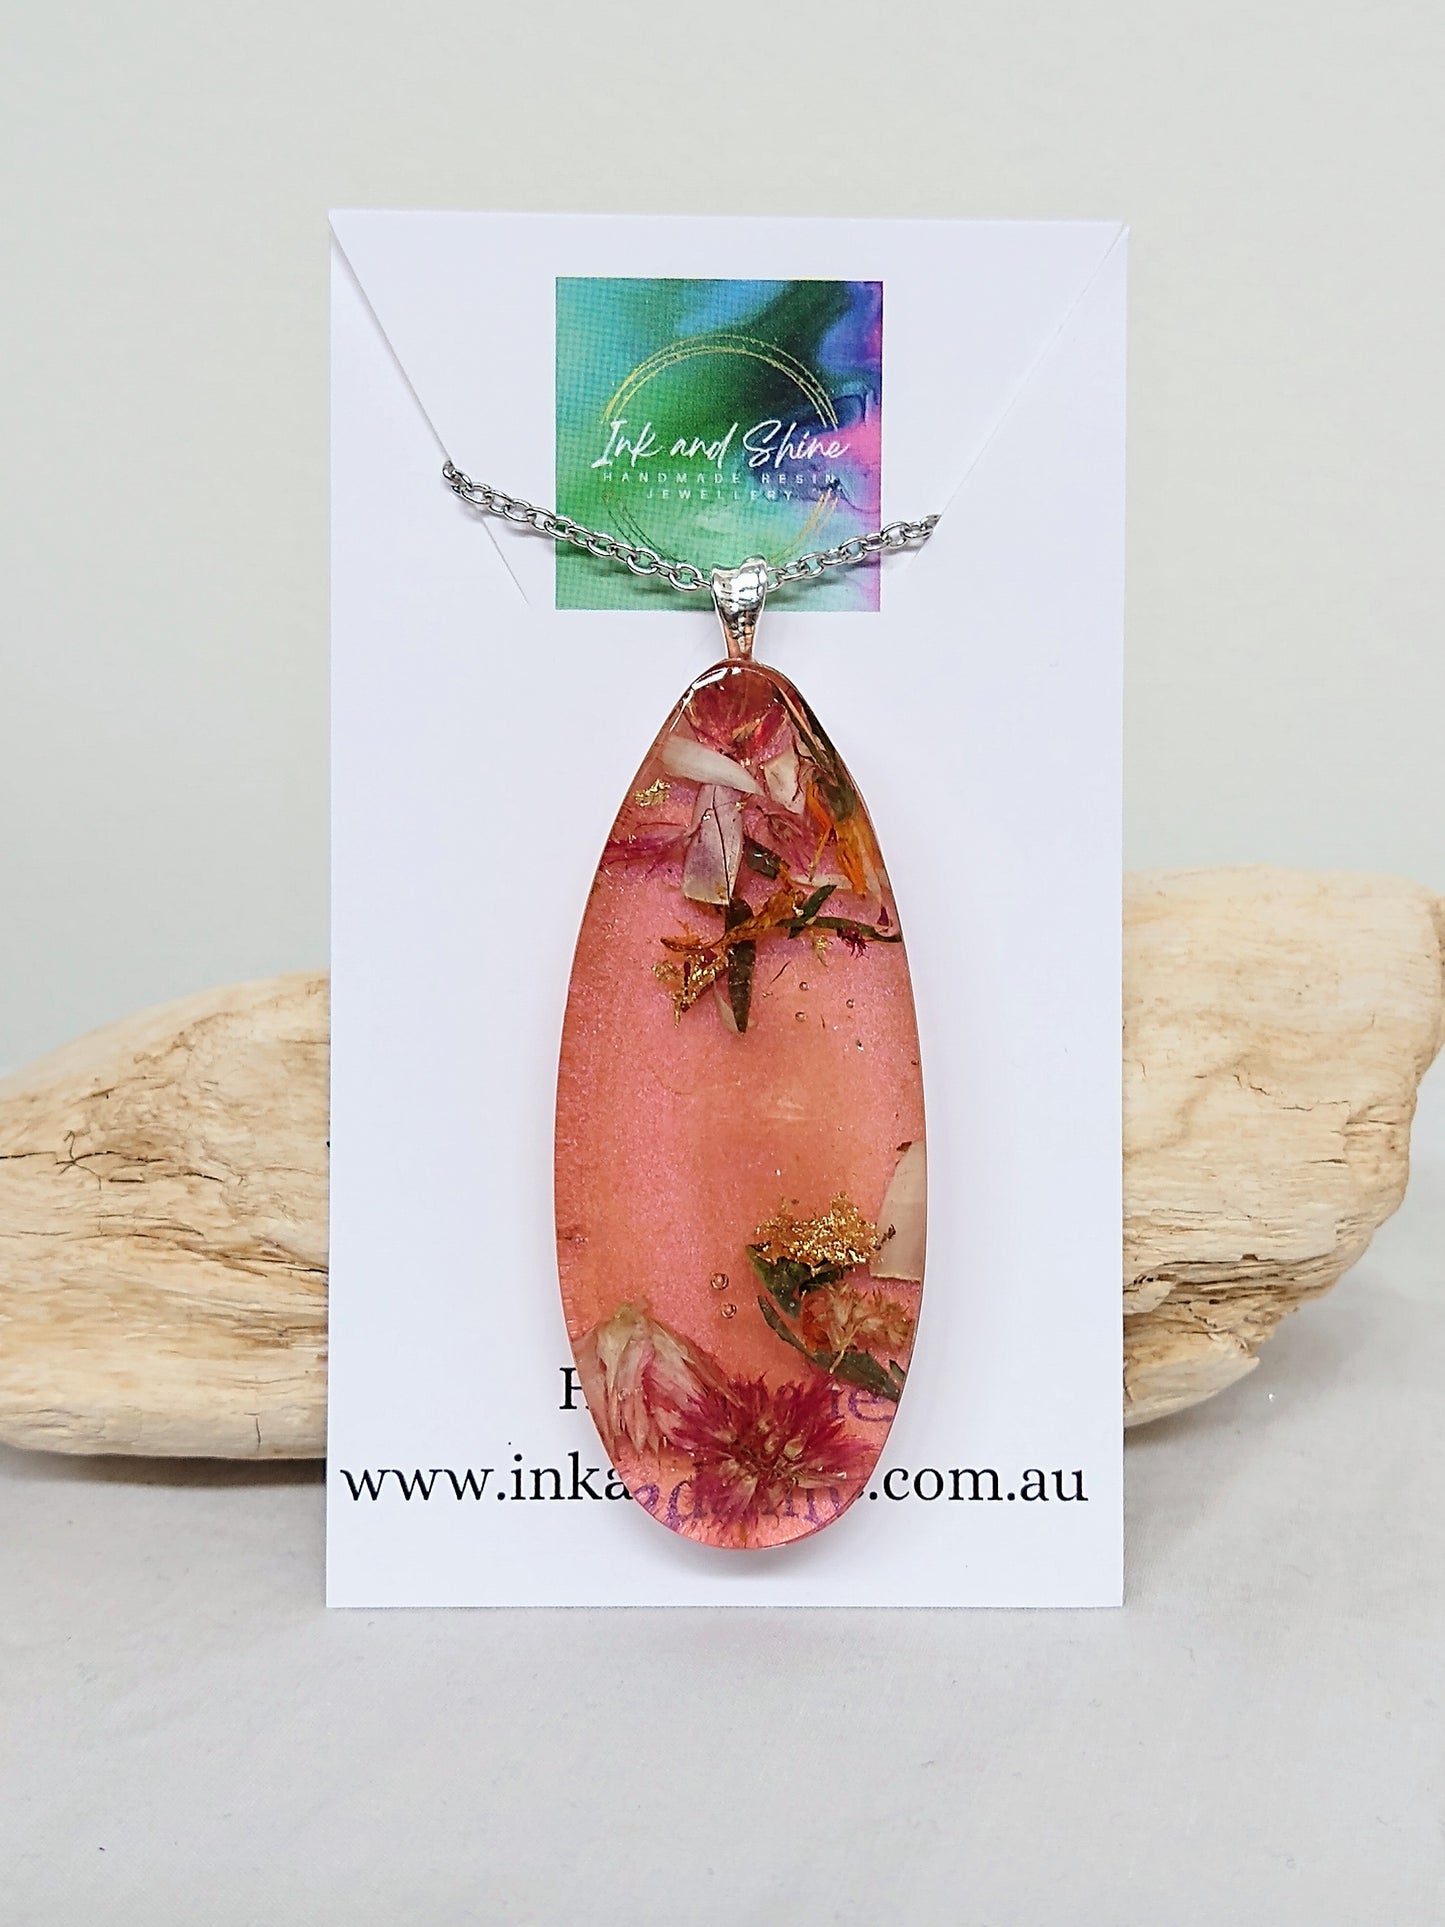 Ellipse shaped resin pendant necklace coloured with orange/pink mica powder and filled with organic dried flowers, on a stainless steel chain.